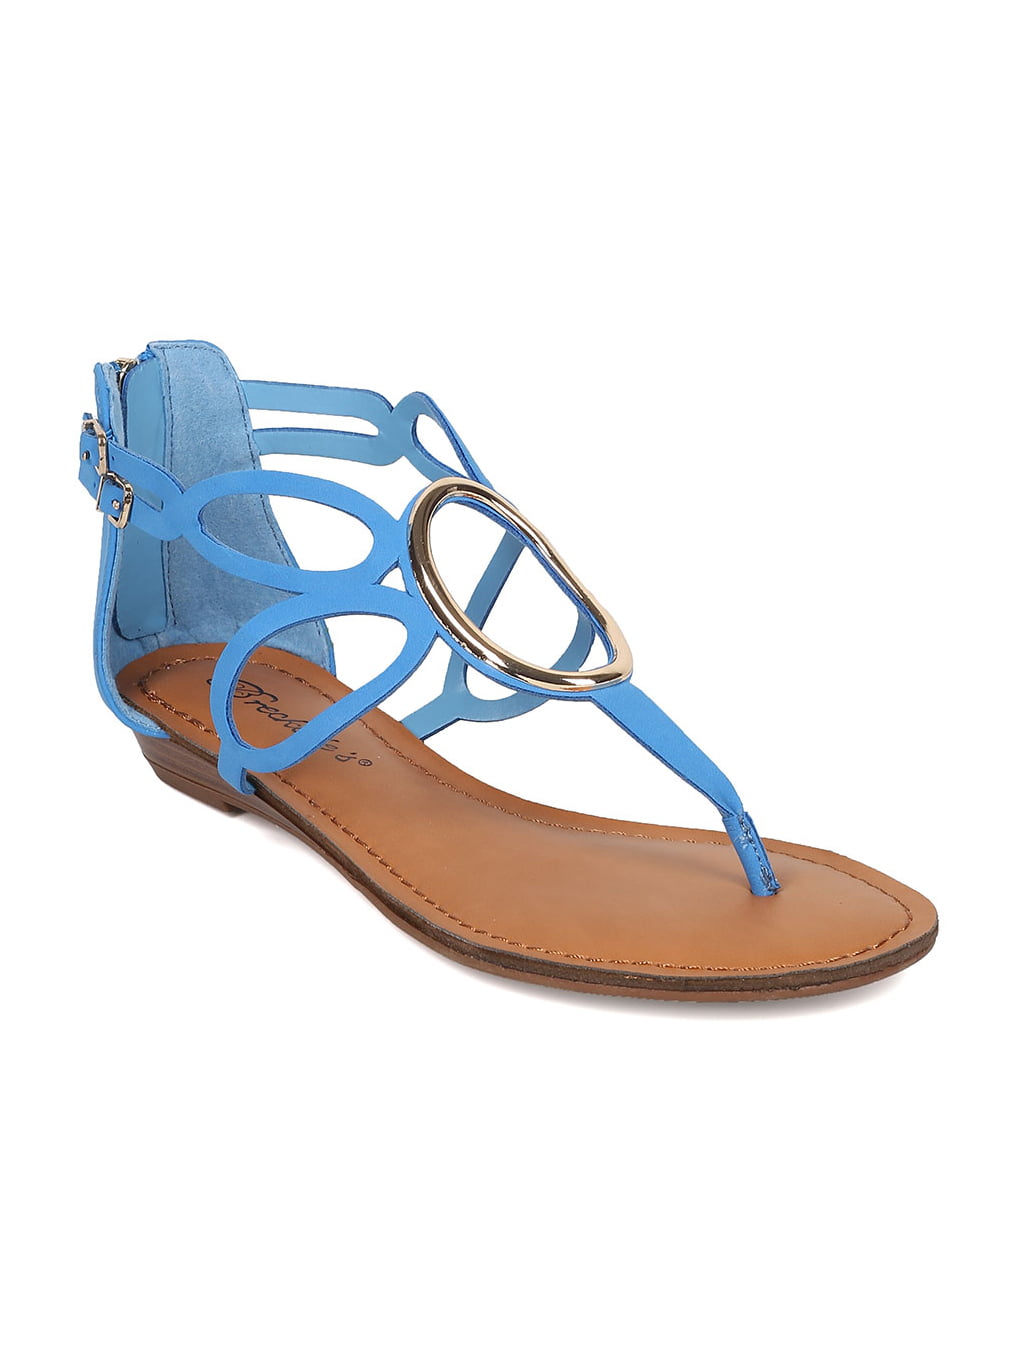 Breckelles Women Leatherette Strappy Cut Out Flat Gladiator Sandals CB02 Light Blue